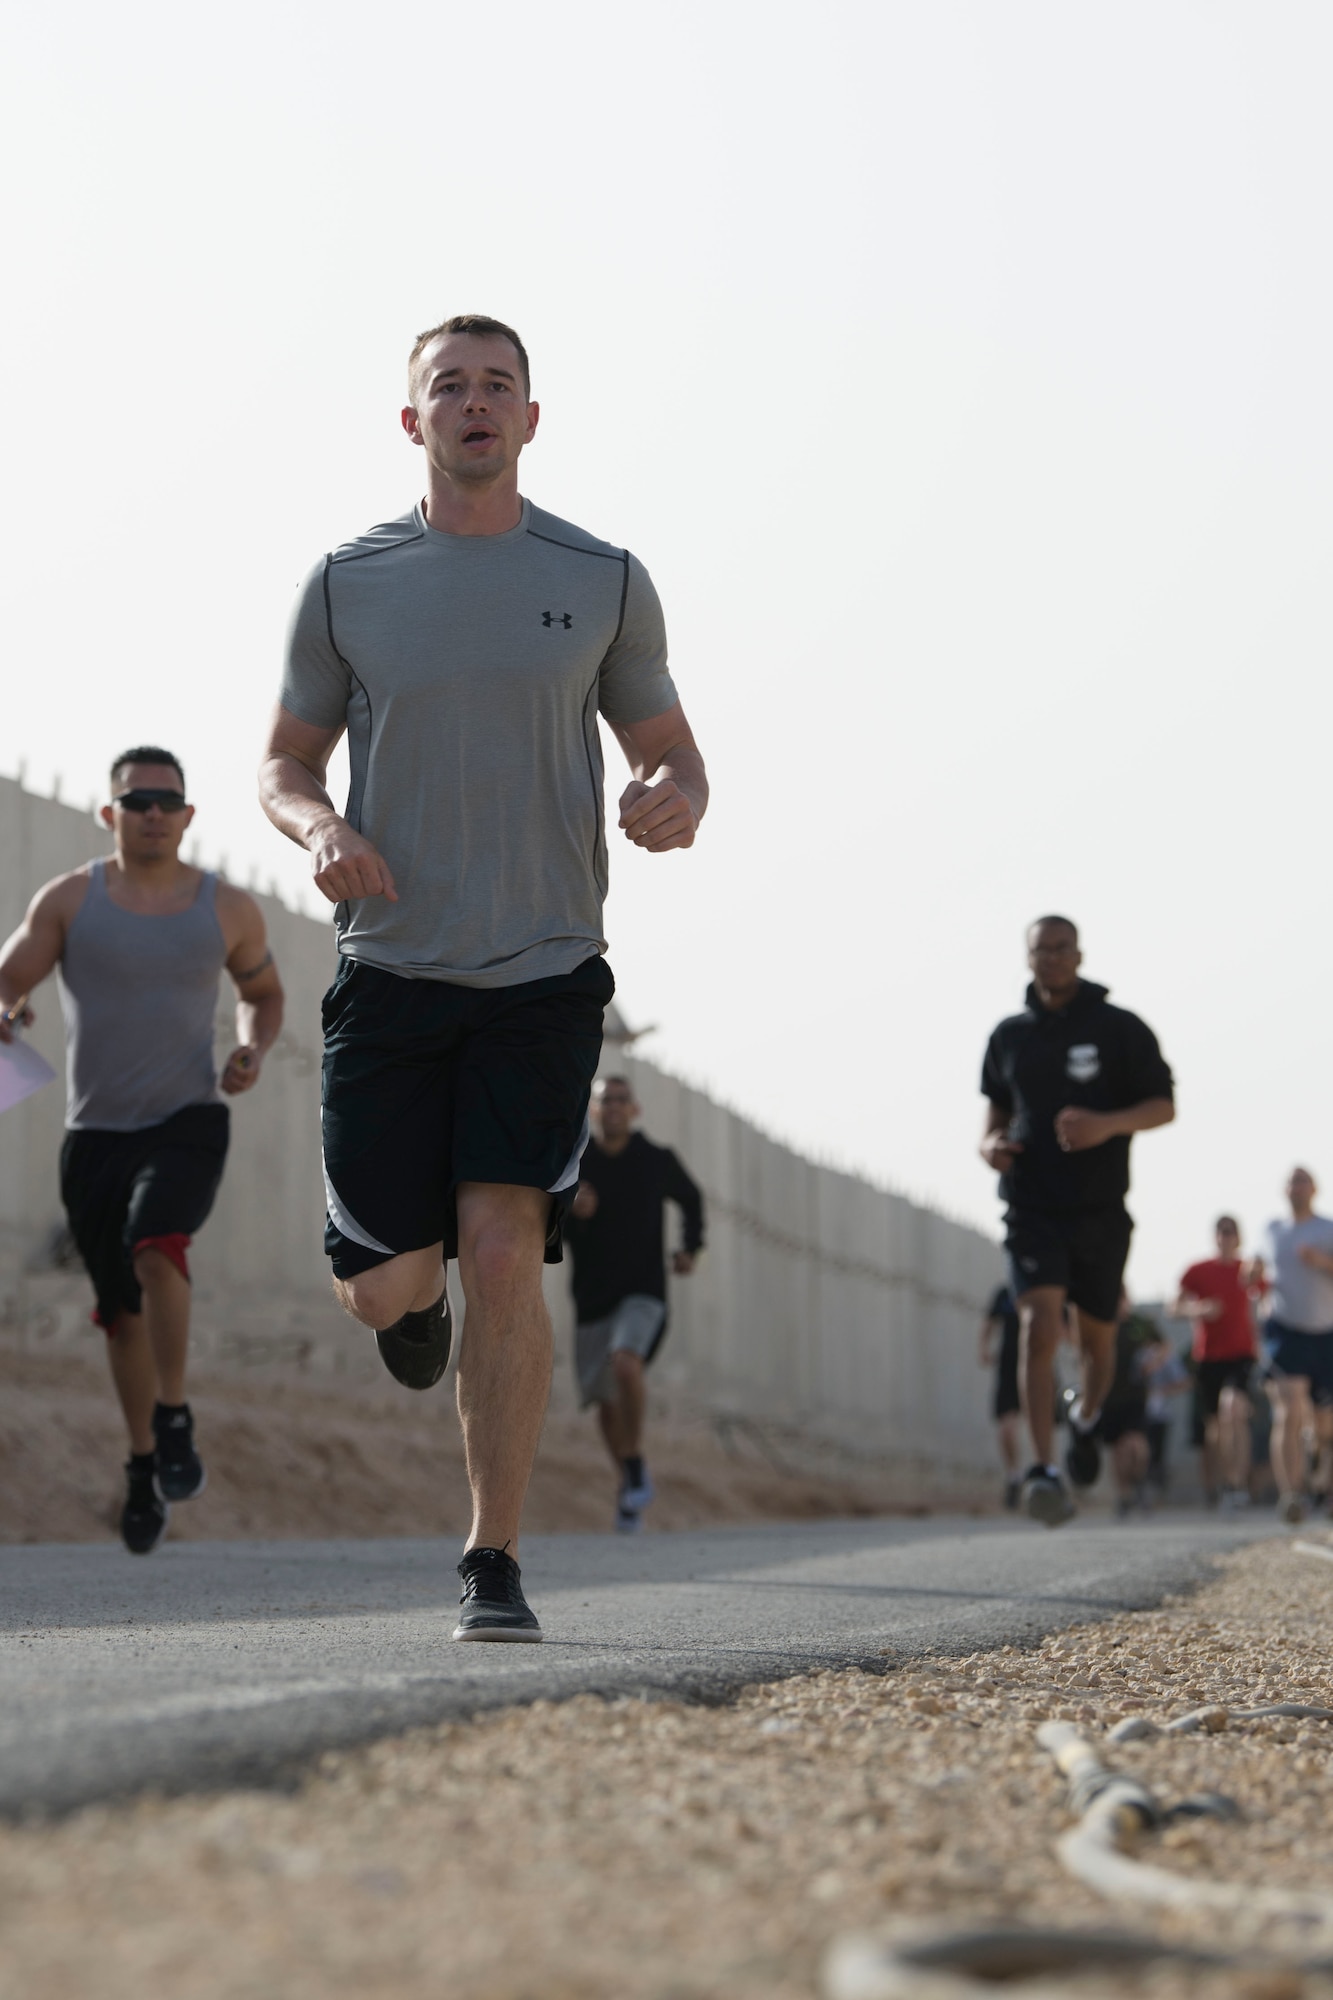 Airmen with the 332nd Air Expeditionary Wing run during the Commander’s Challenge, which the Sexual Assault Prevention and Response office hosted at an undisclosed location in Southwest Asia May 4, 2018.